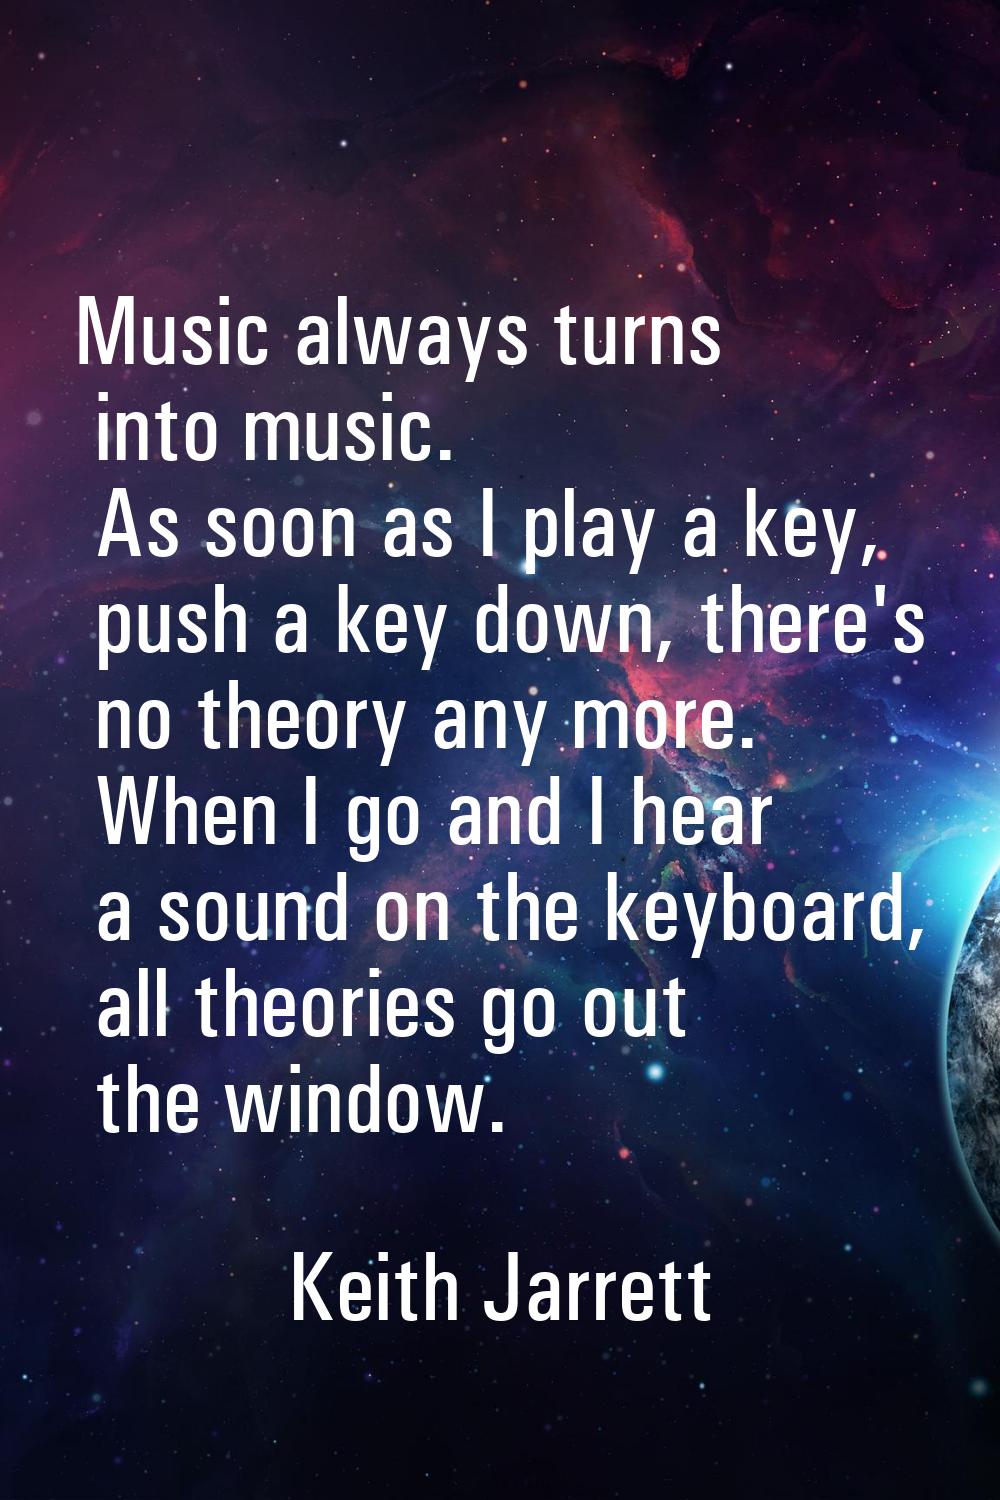 Music always turns into music. As soon as I play a key, push a key down, there's no theory any more